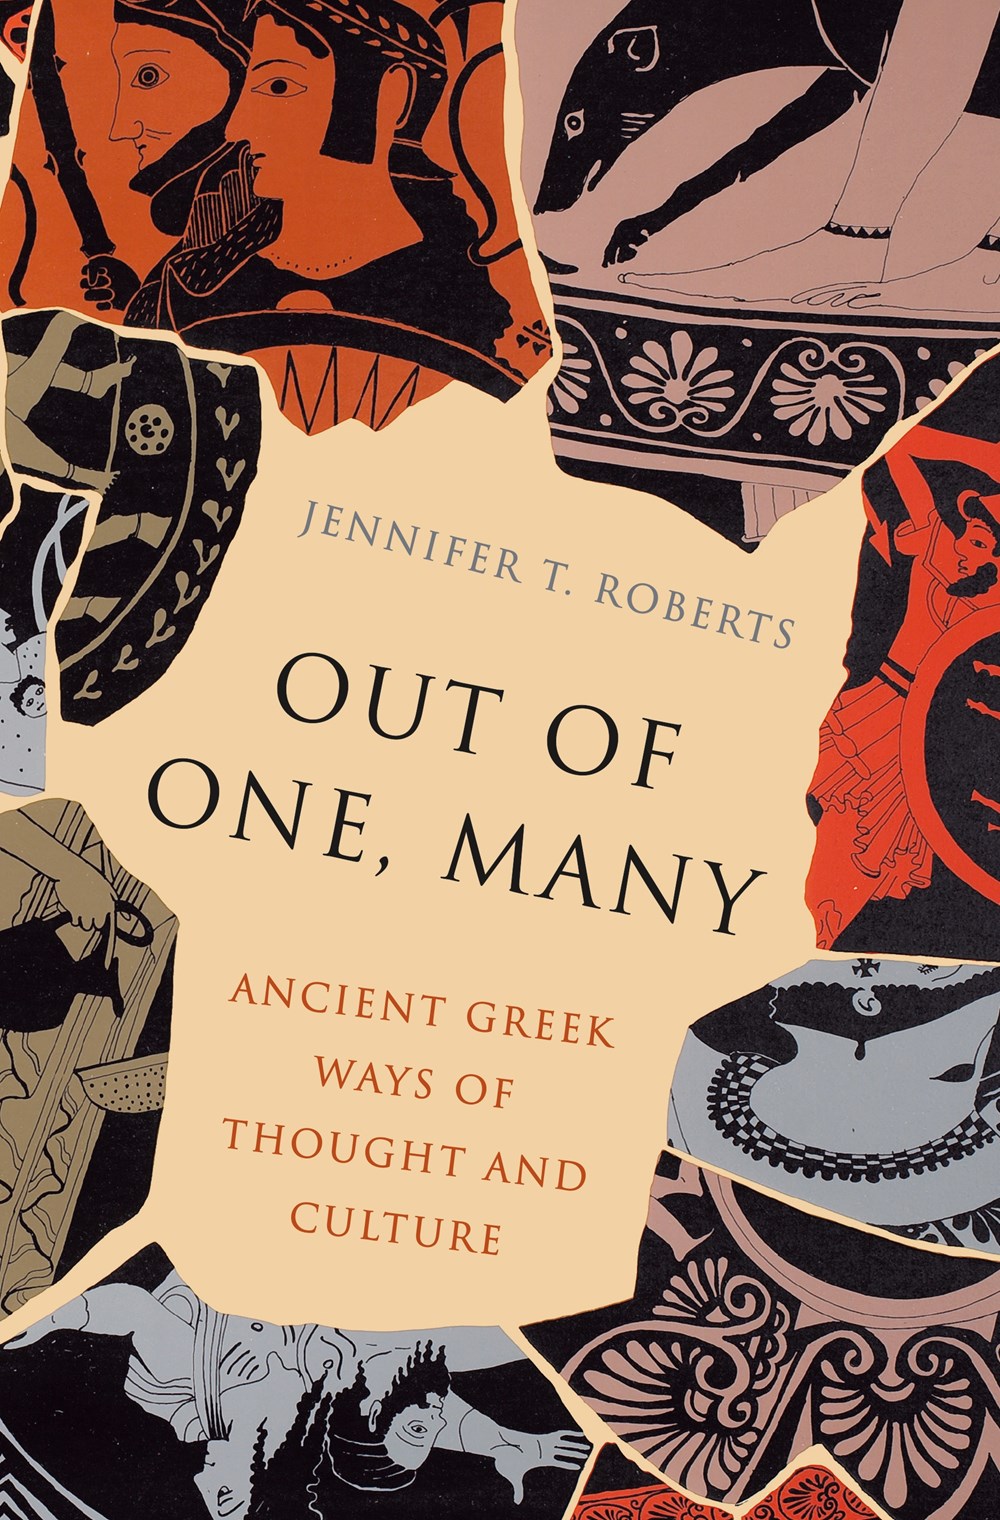 Out of One, Many: Ancient Greek Ways of Thought and Culture